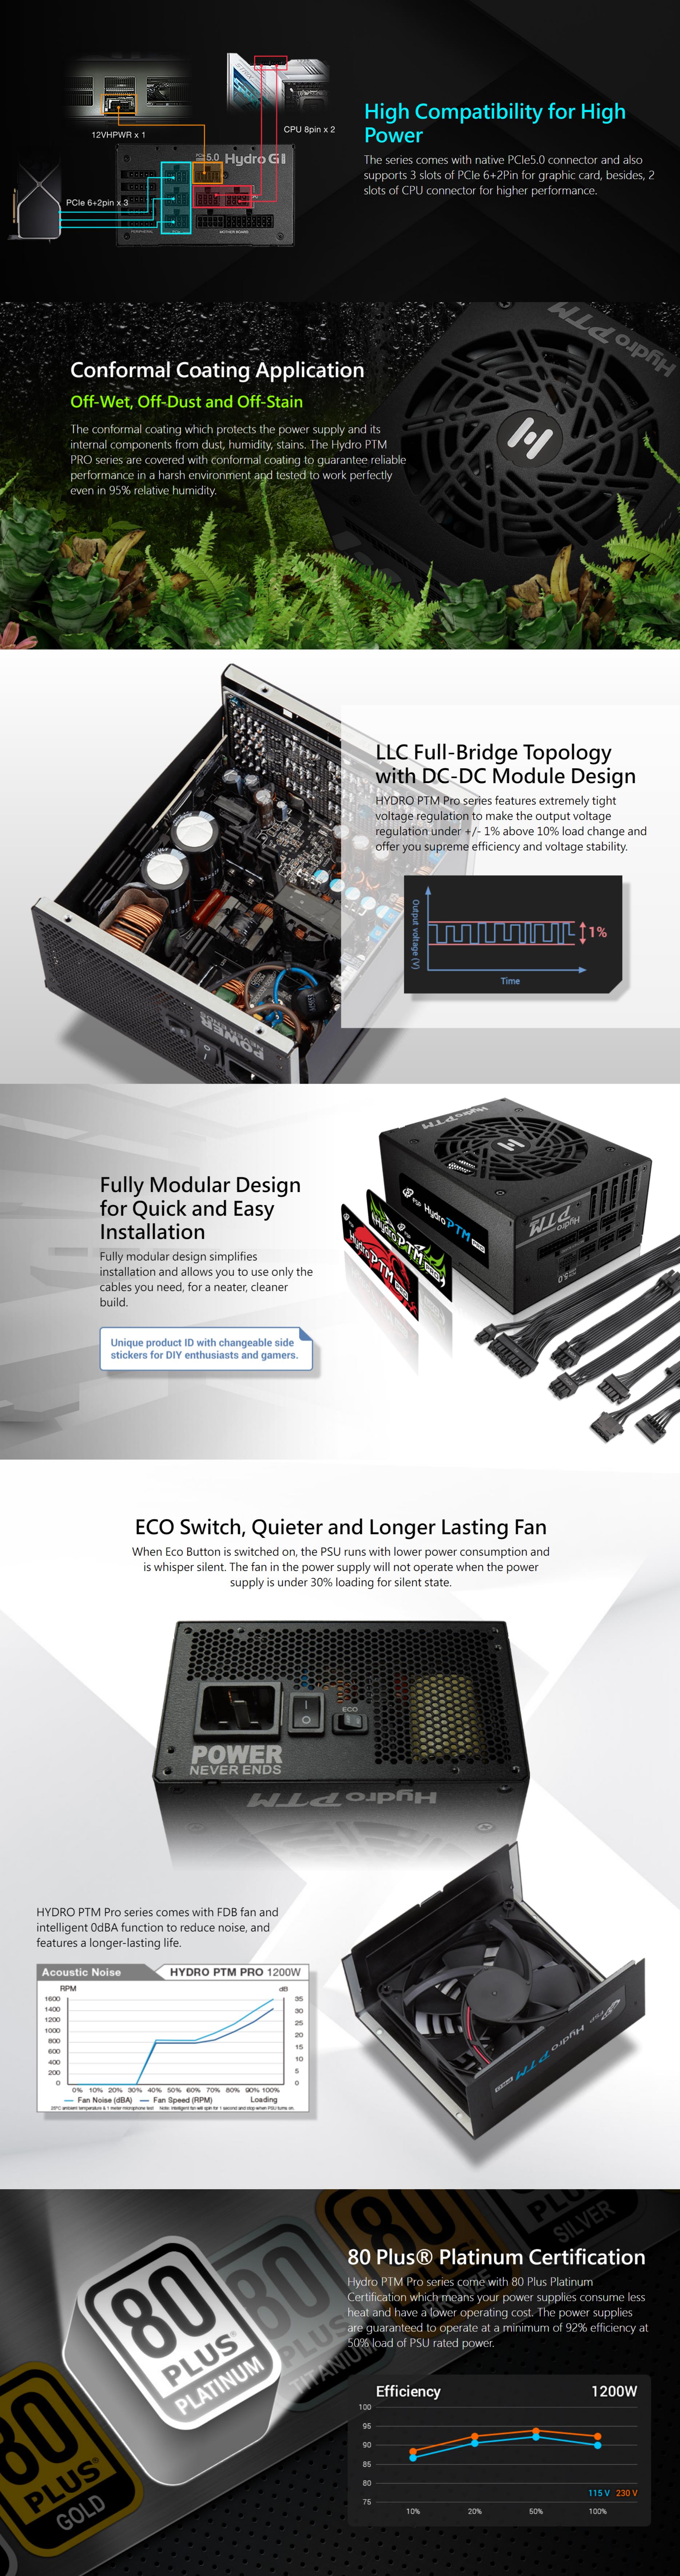 A large marketing image providing additional information about the product FSP Hydro PTM PRO 1200W Platinum PCIe 5.0 ATX Modular PSU - Additional alt info not provided